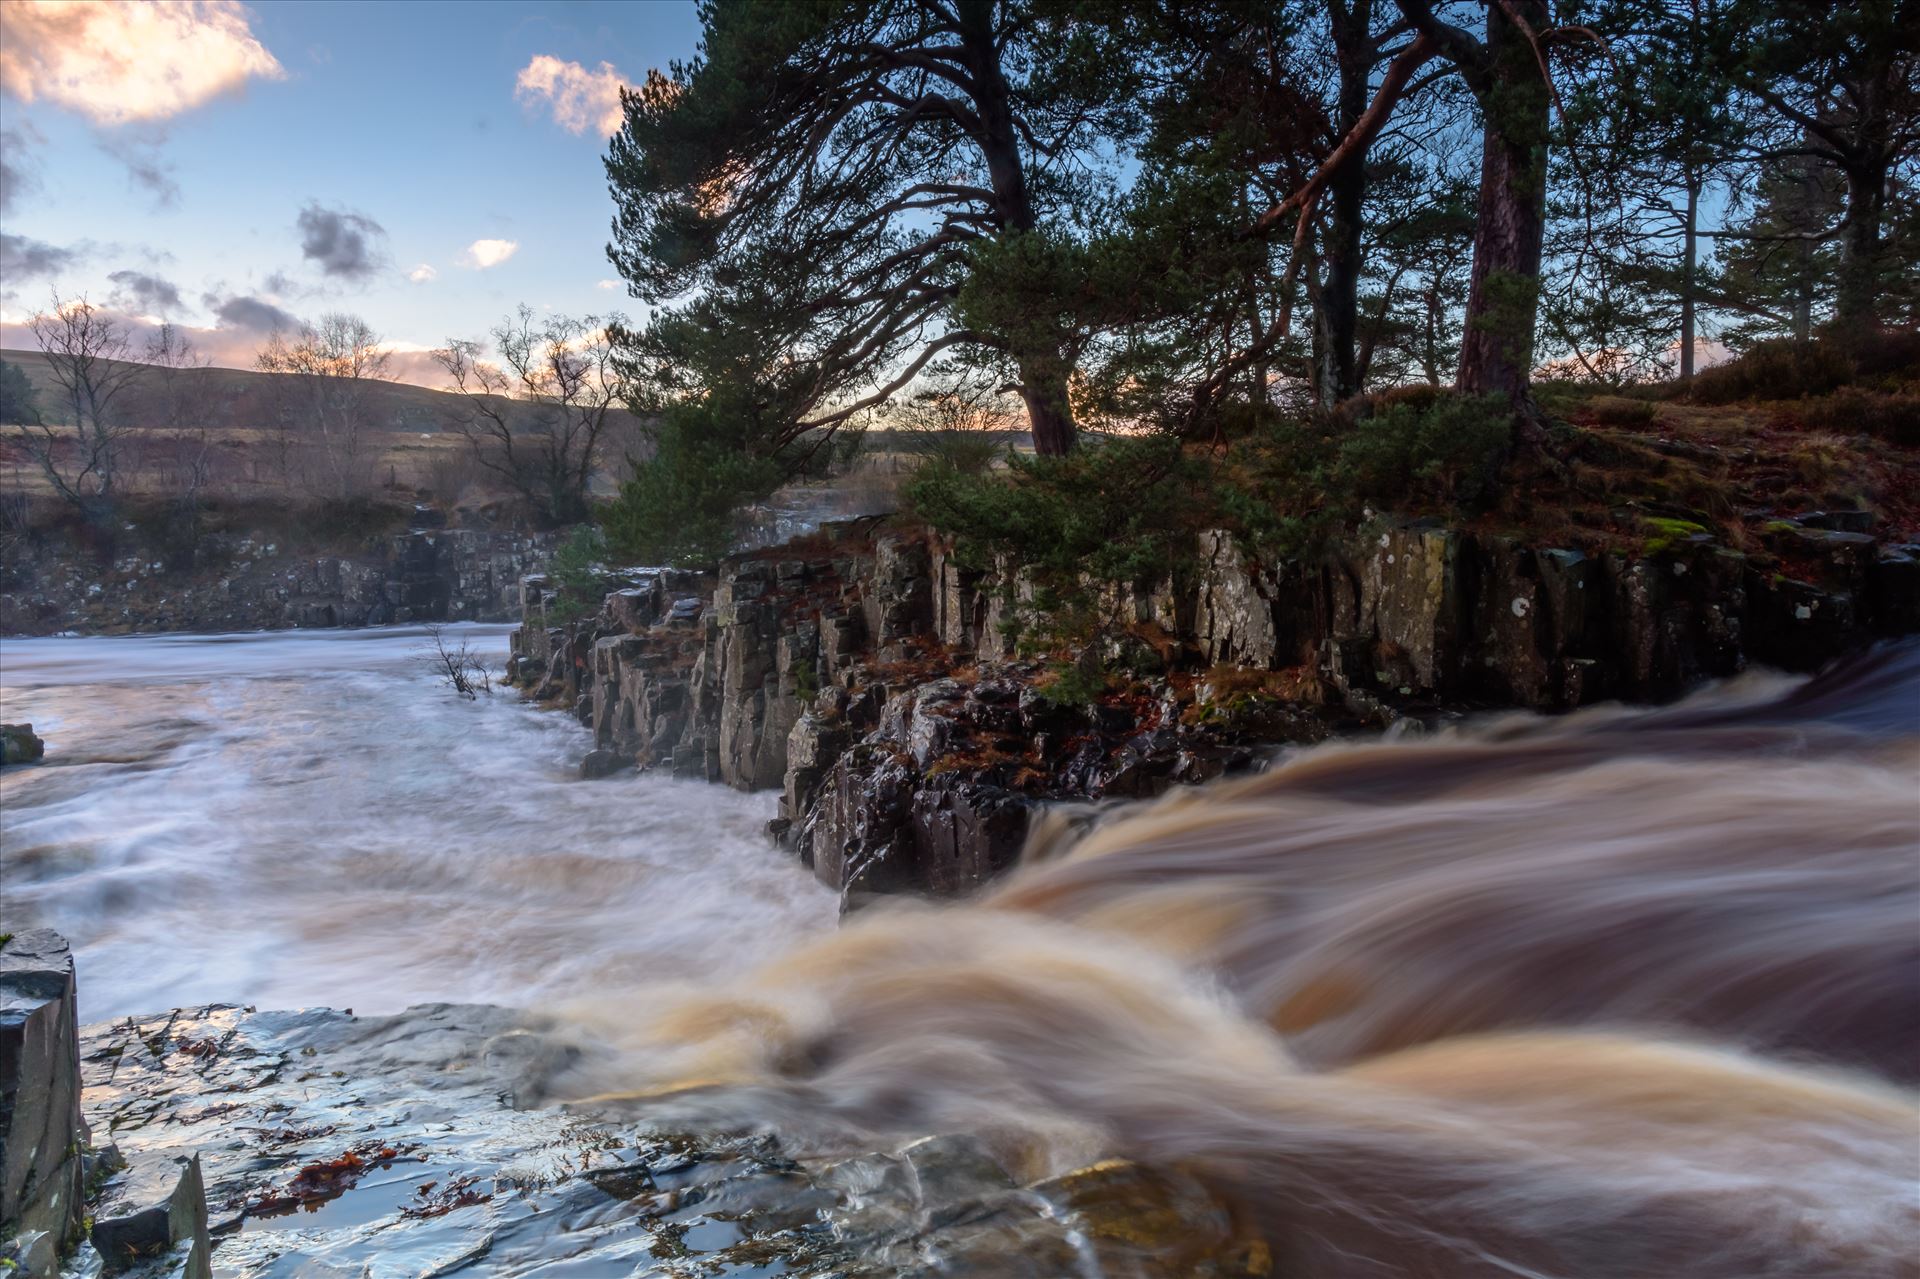 Low Force, Teesdale - Low Force is a set of waterfalls on the River Tees in beautiful Upper Teesdale. by philreay